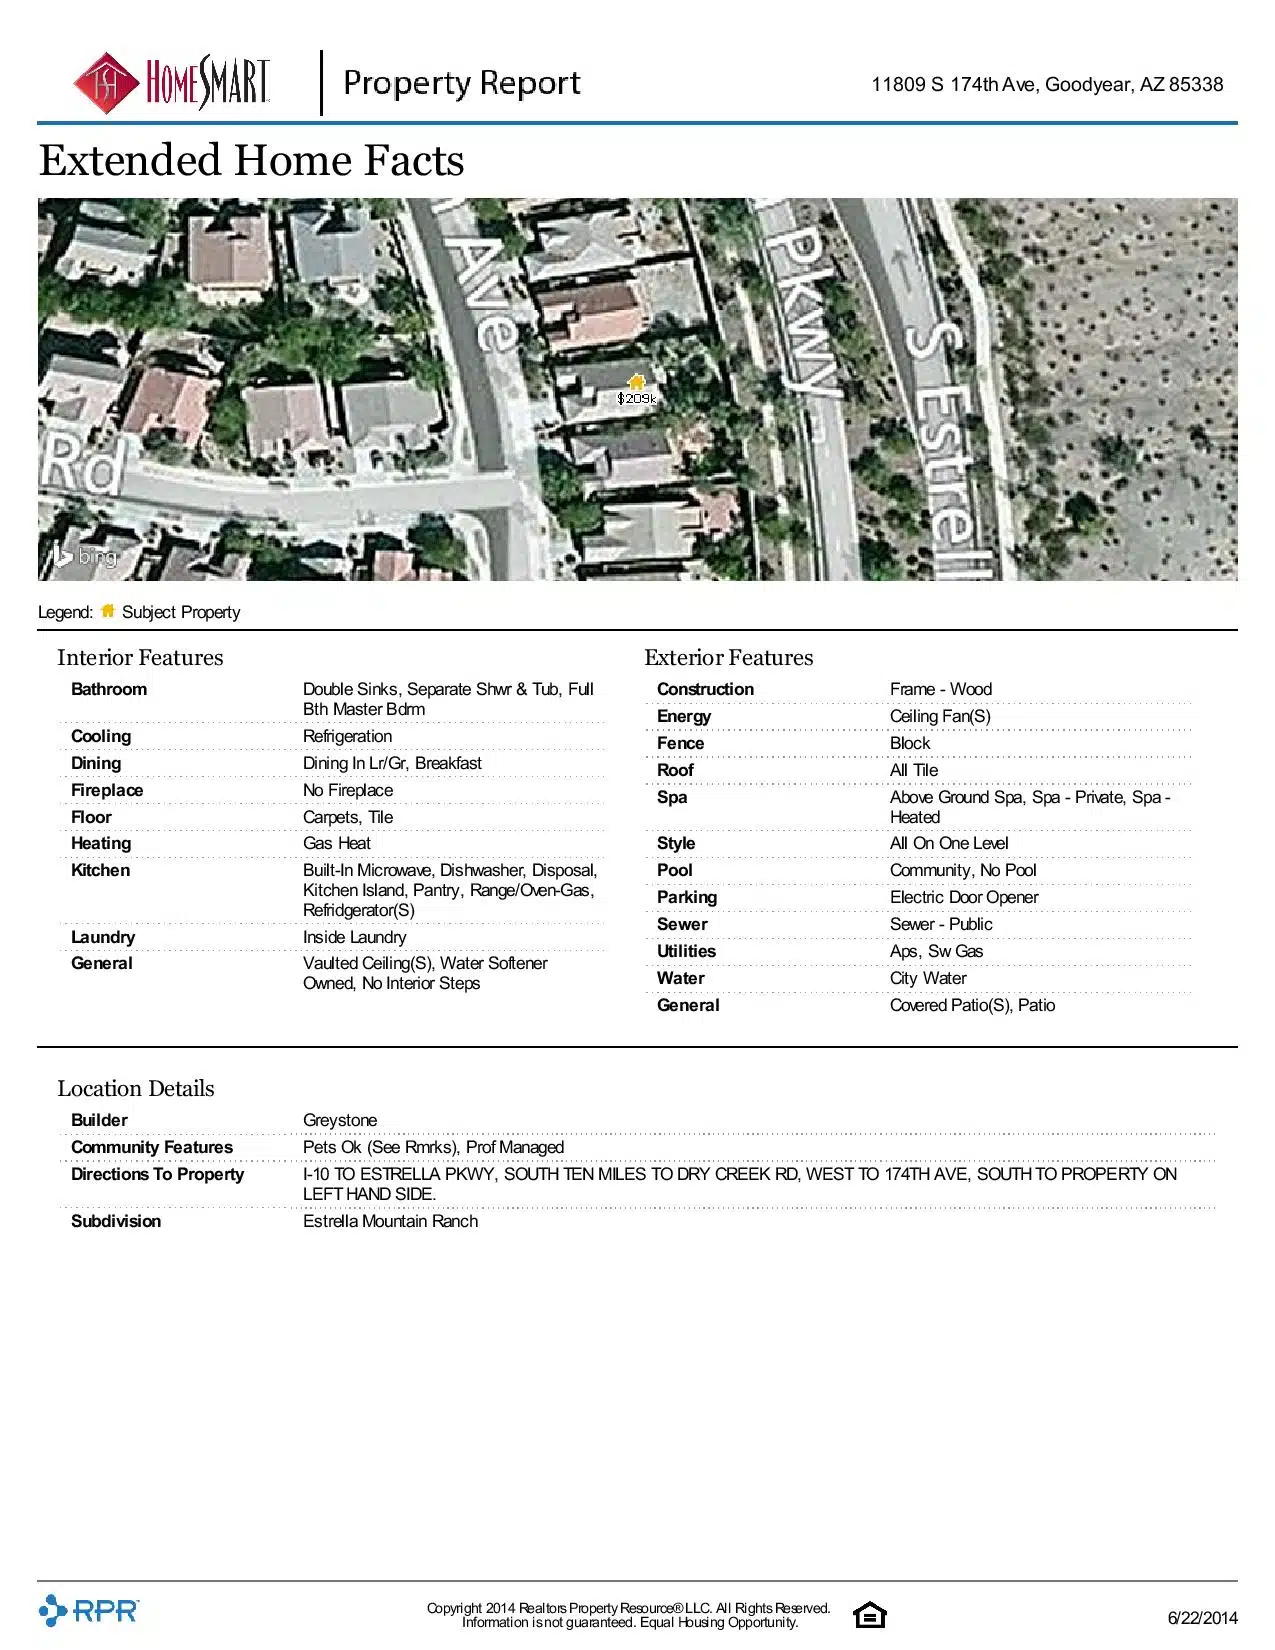 11809-S-174th-Ave-Goodyear-AZ-85338-page-004